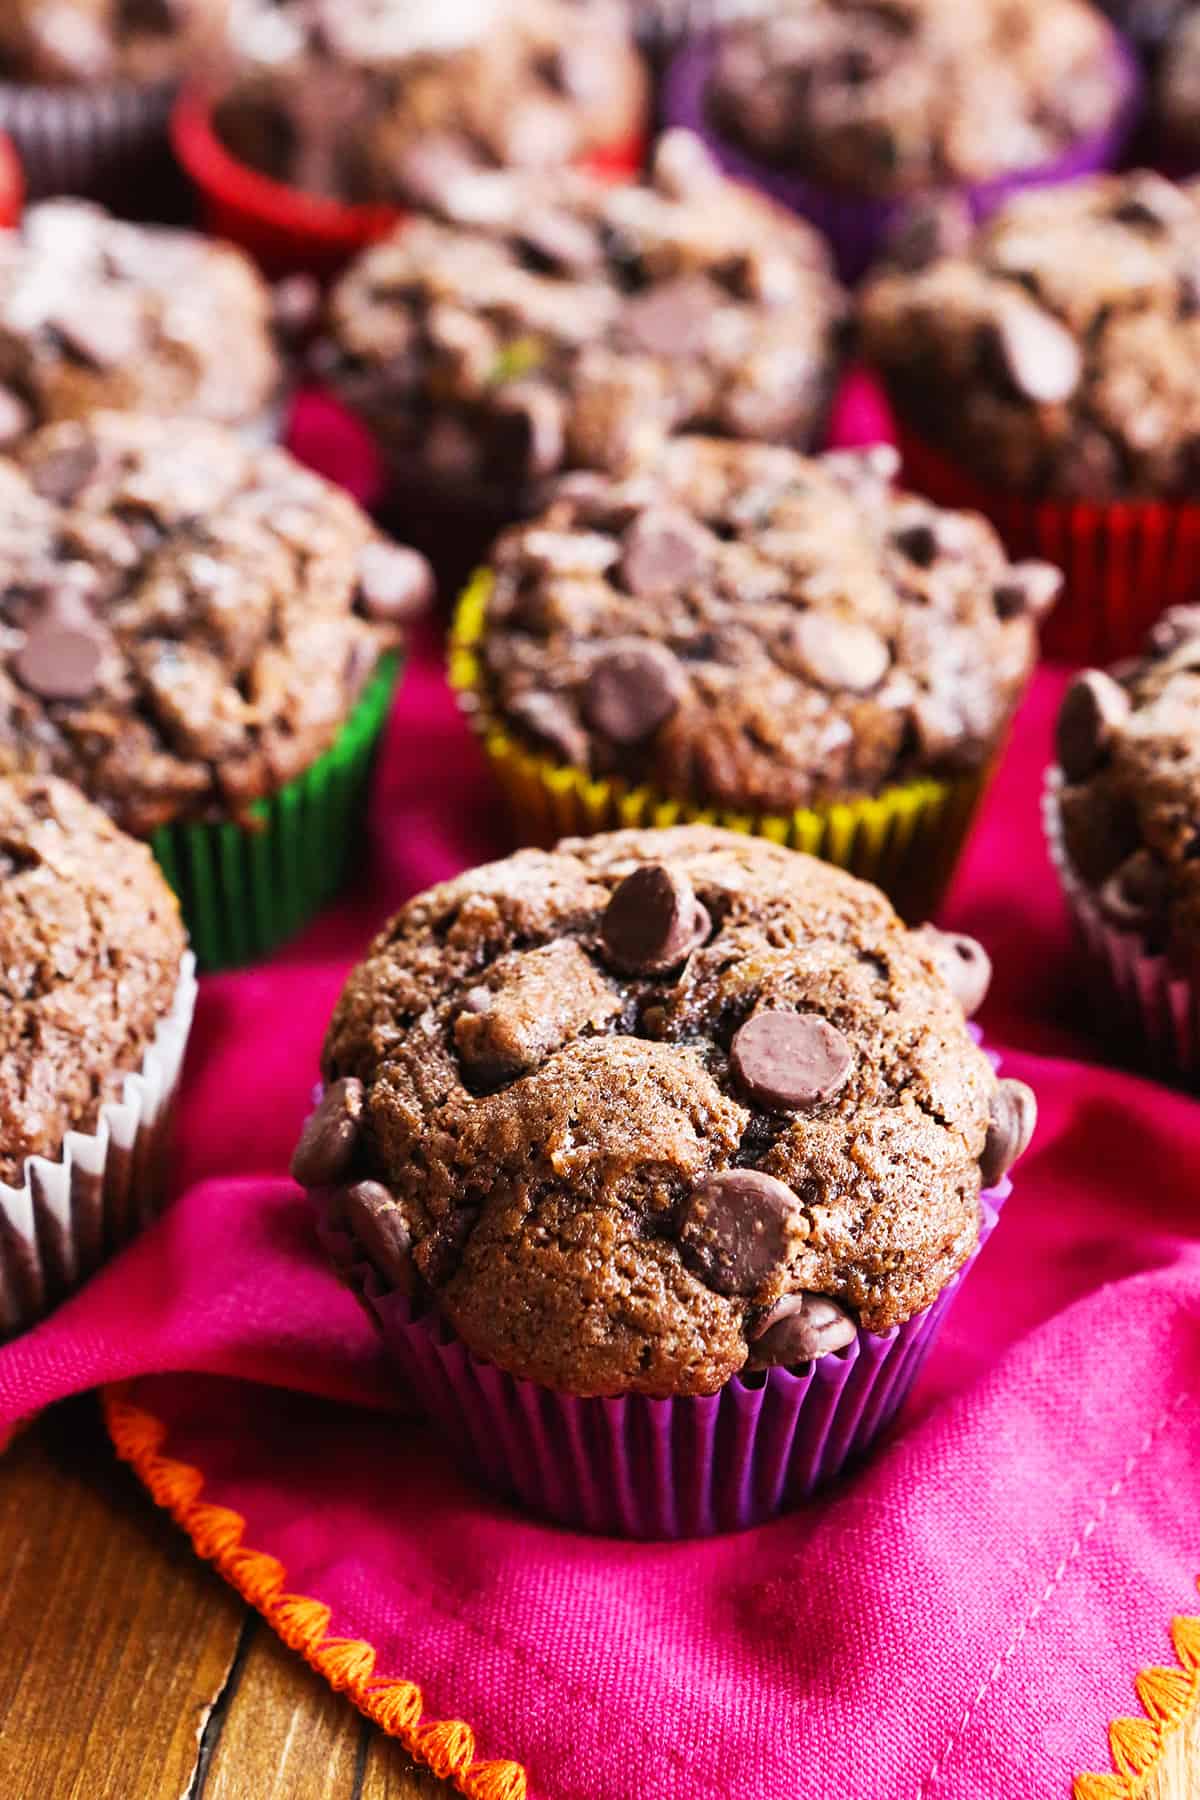 Double chocolate zucchini muffins lined up on a pink placemat.